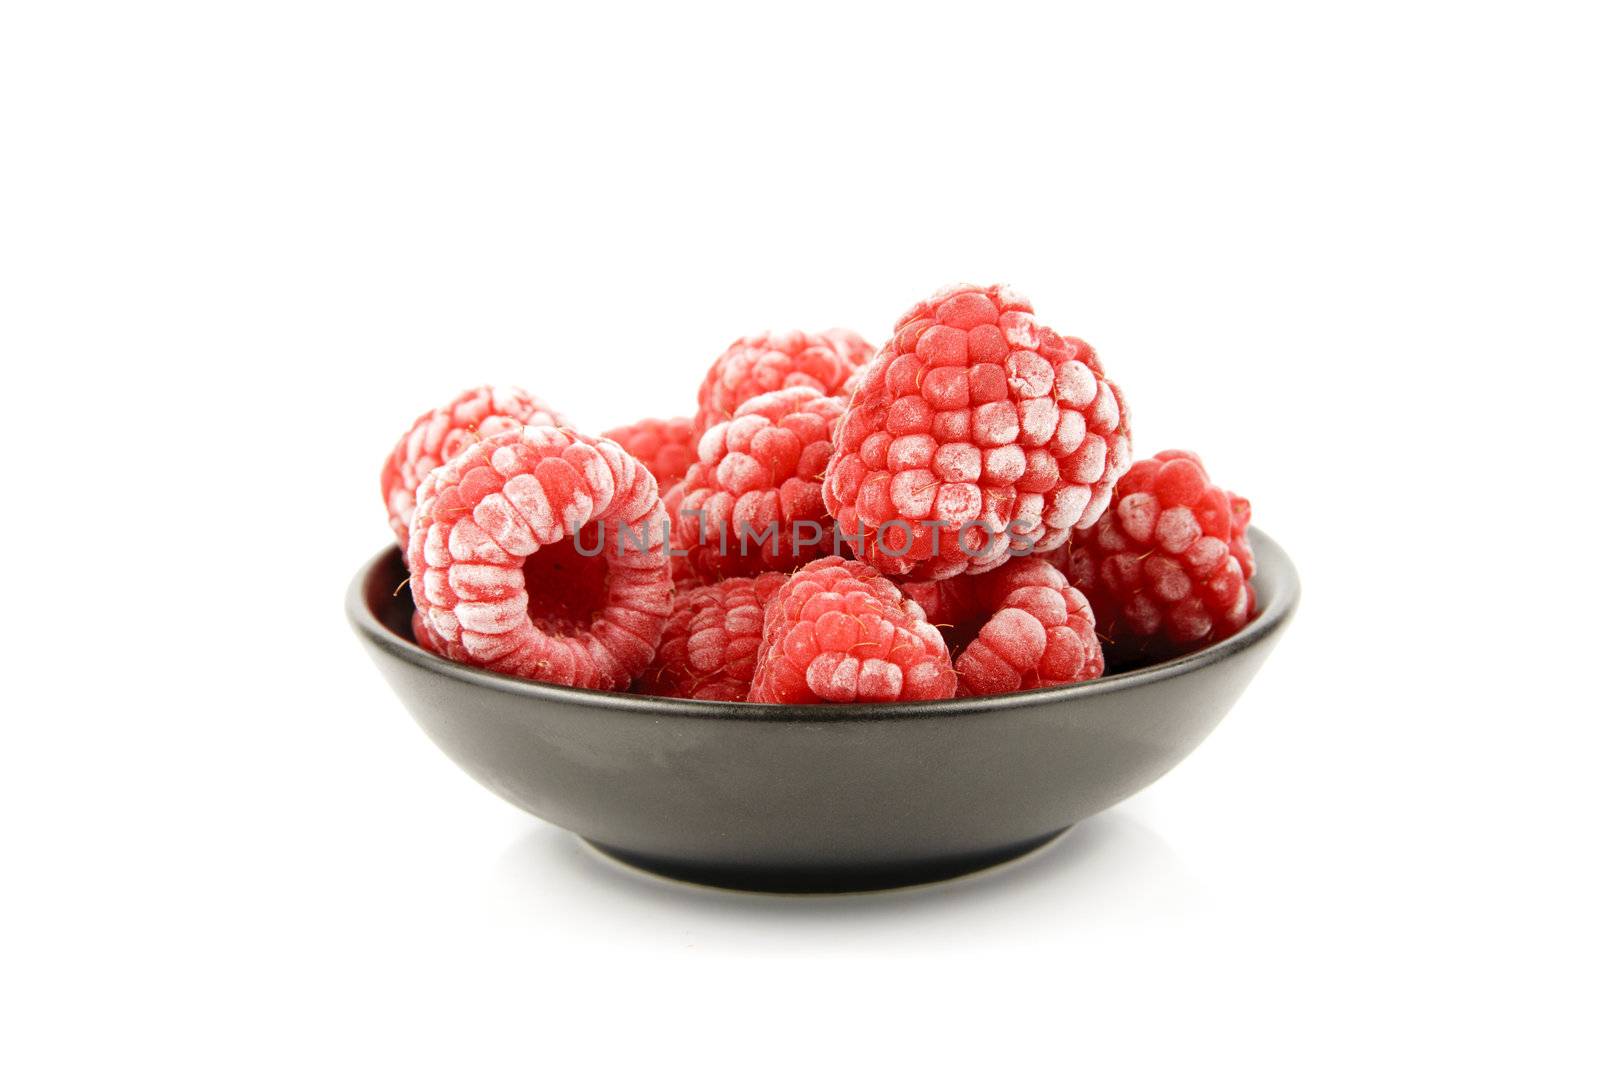 Frozen Raspberries in a Bowl by KeithWilson